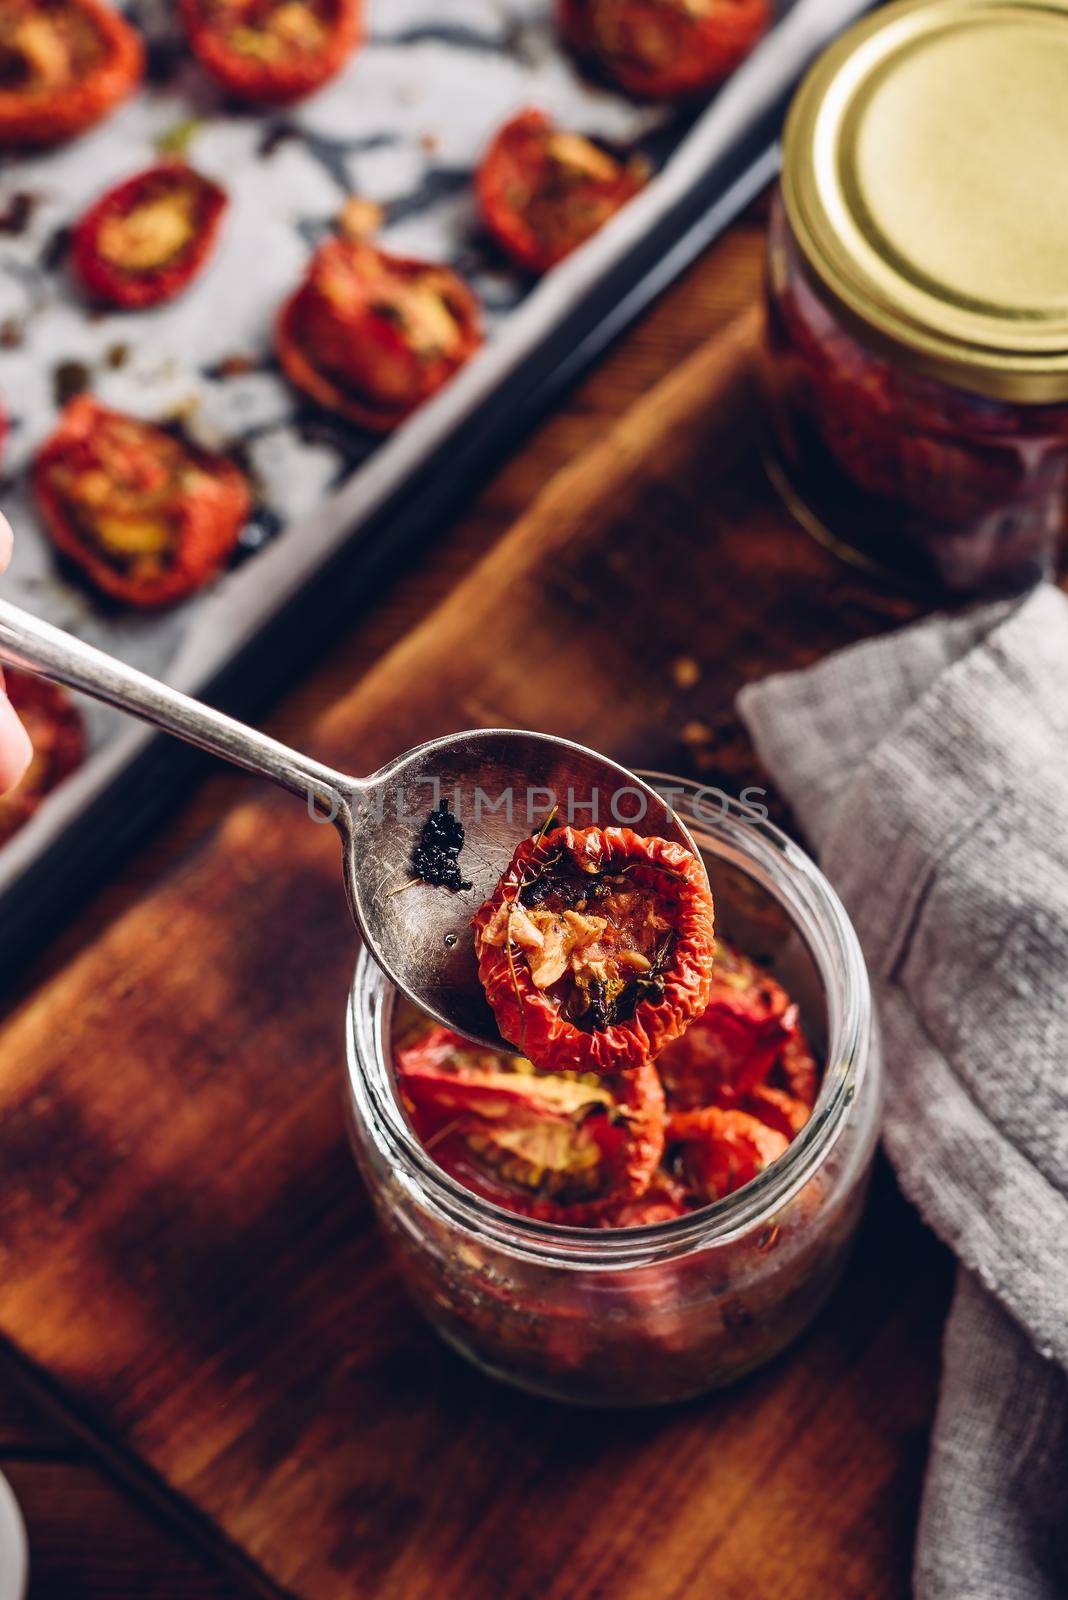 Preserving of Sun Dried Tomatoes with Thyme in a Jar by Seva_blsv